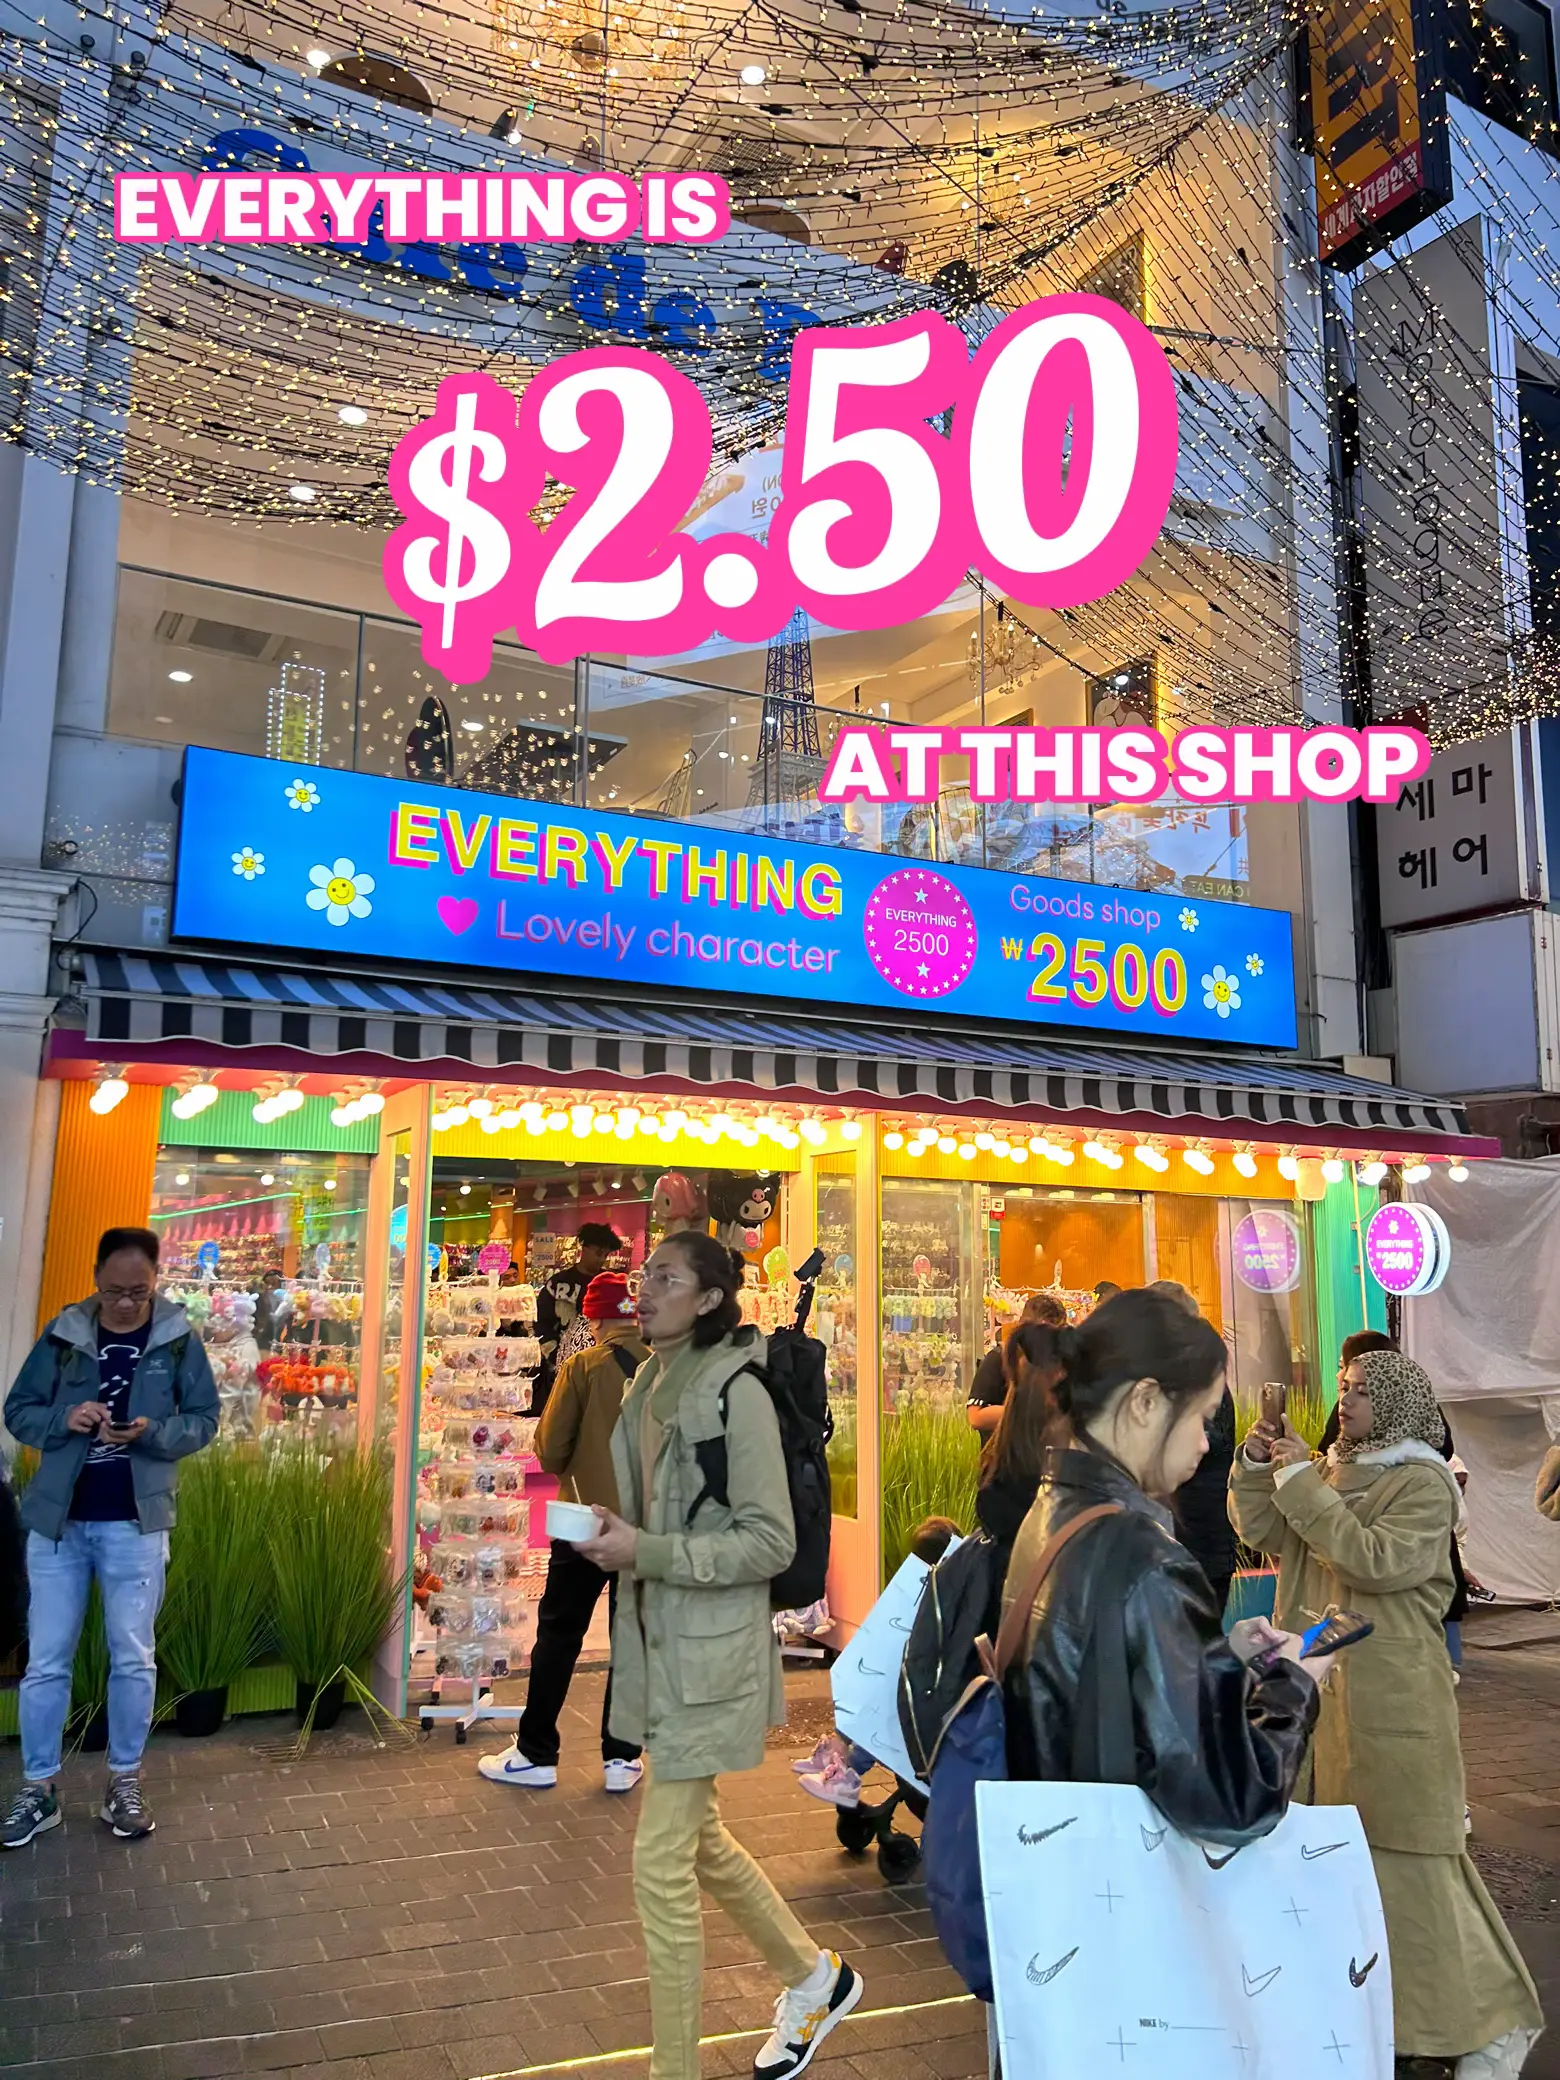 this shop in korea sells EVERYTHING at $2.50??? 🤯's images